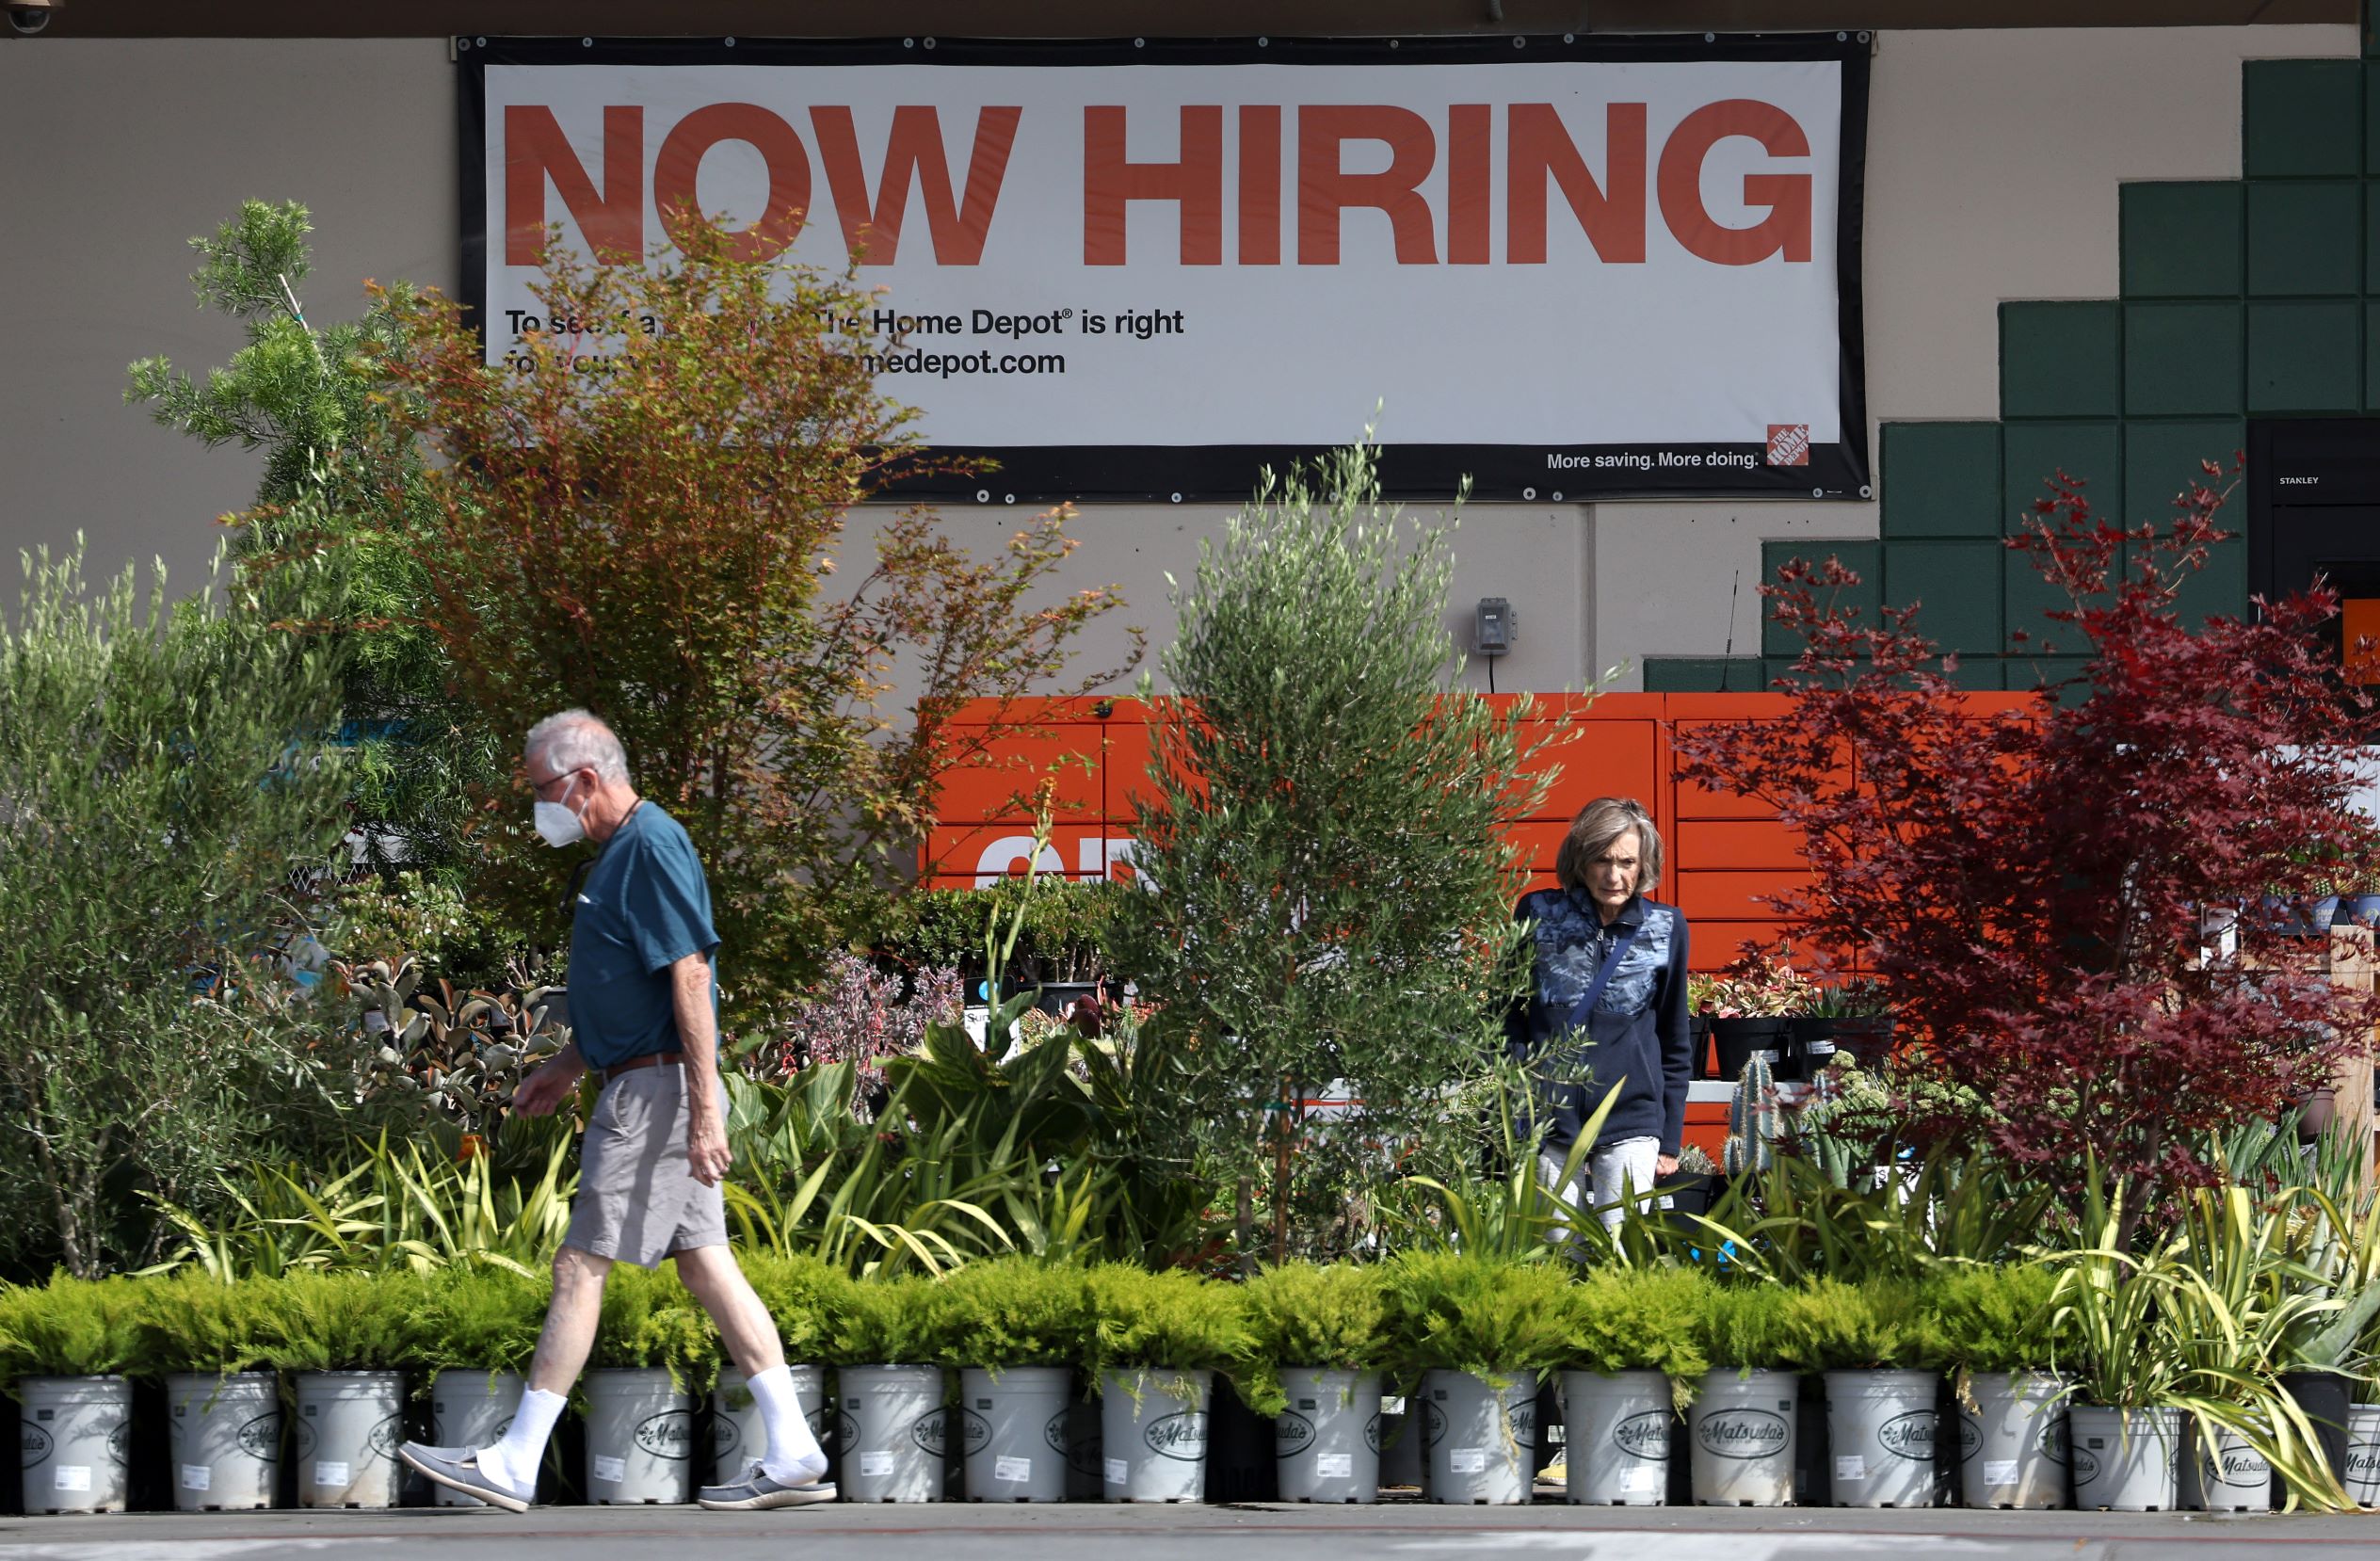 Fewer Americans Apply for Jobless Aid Last Week